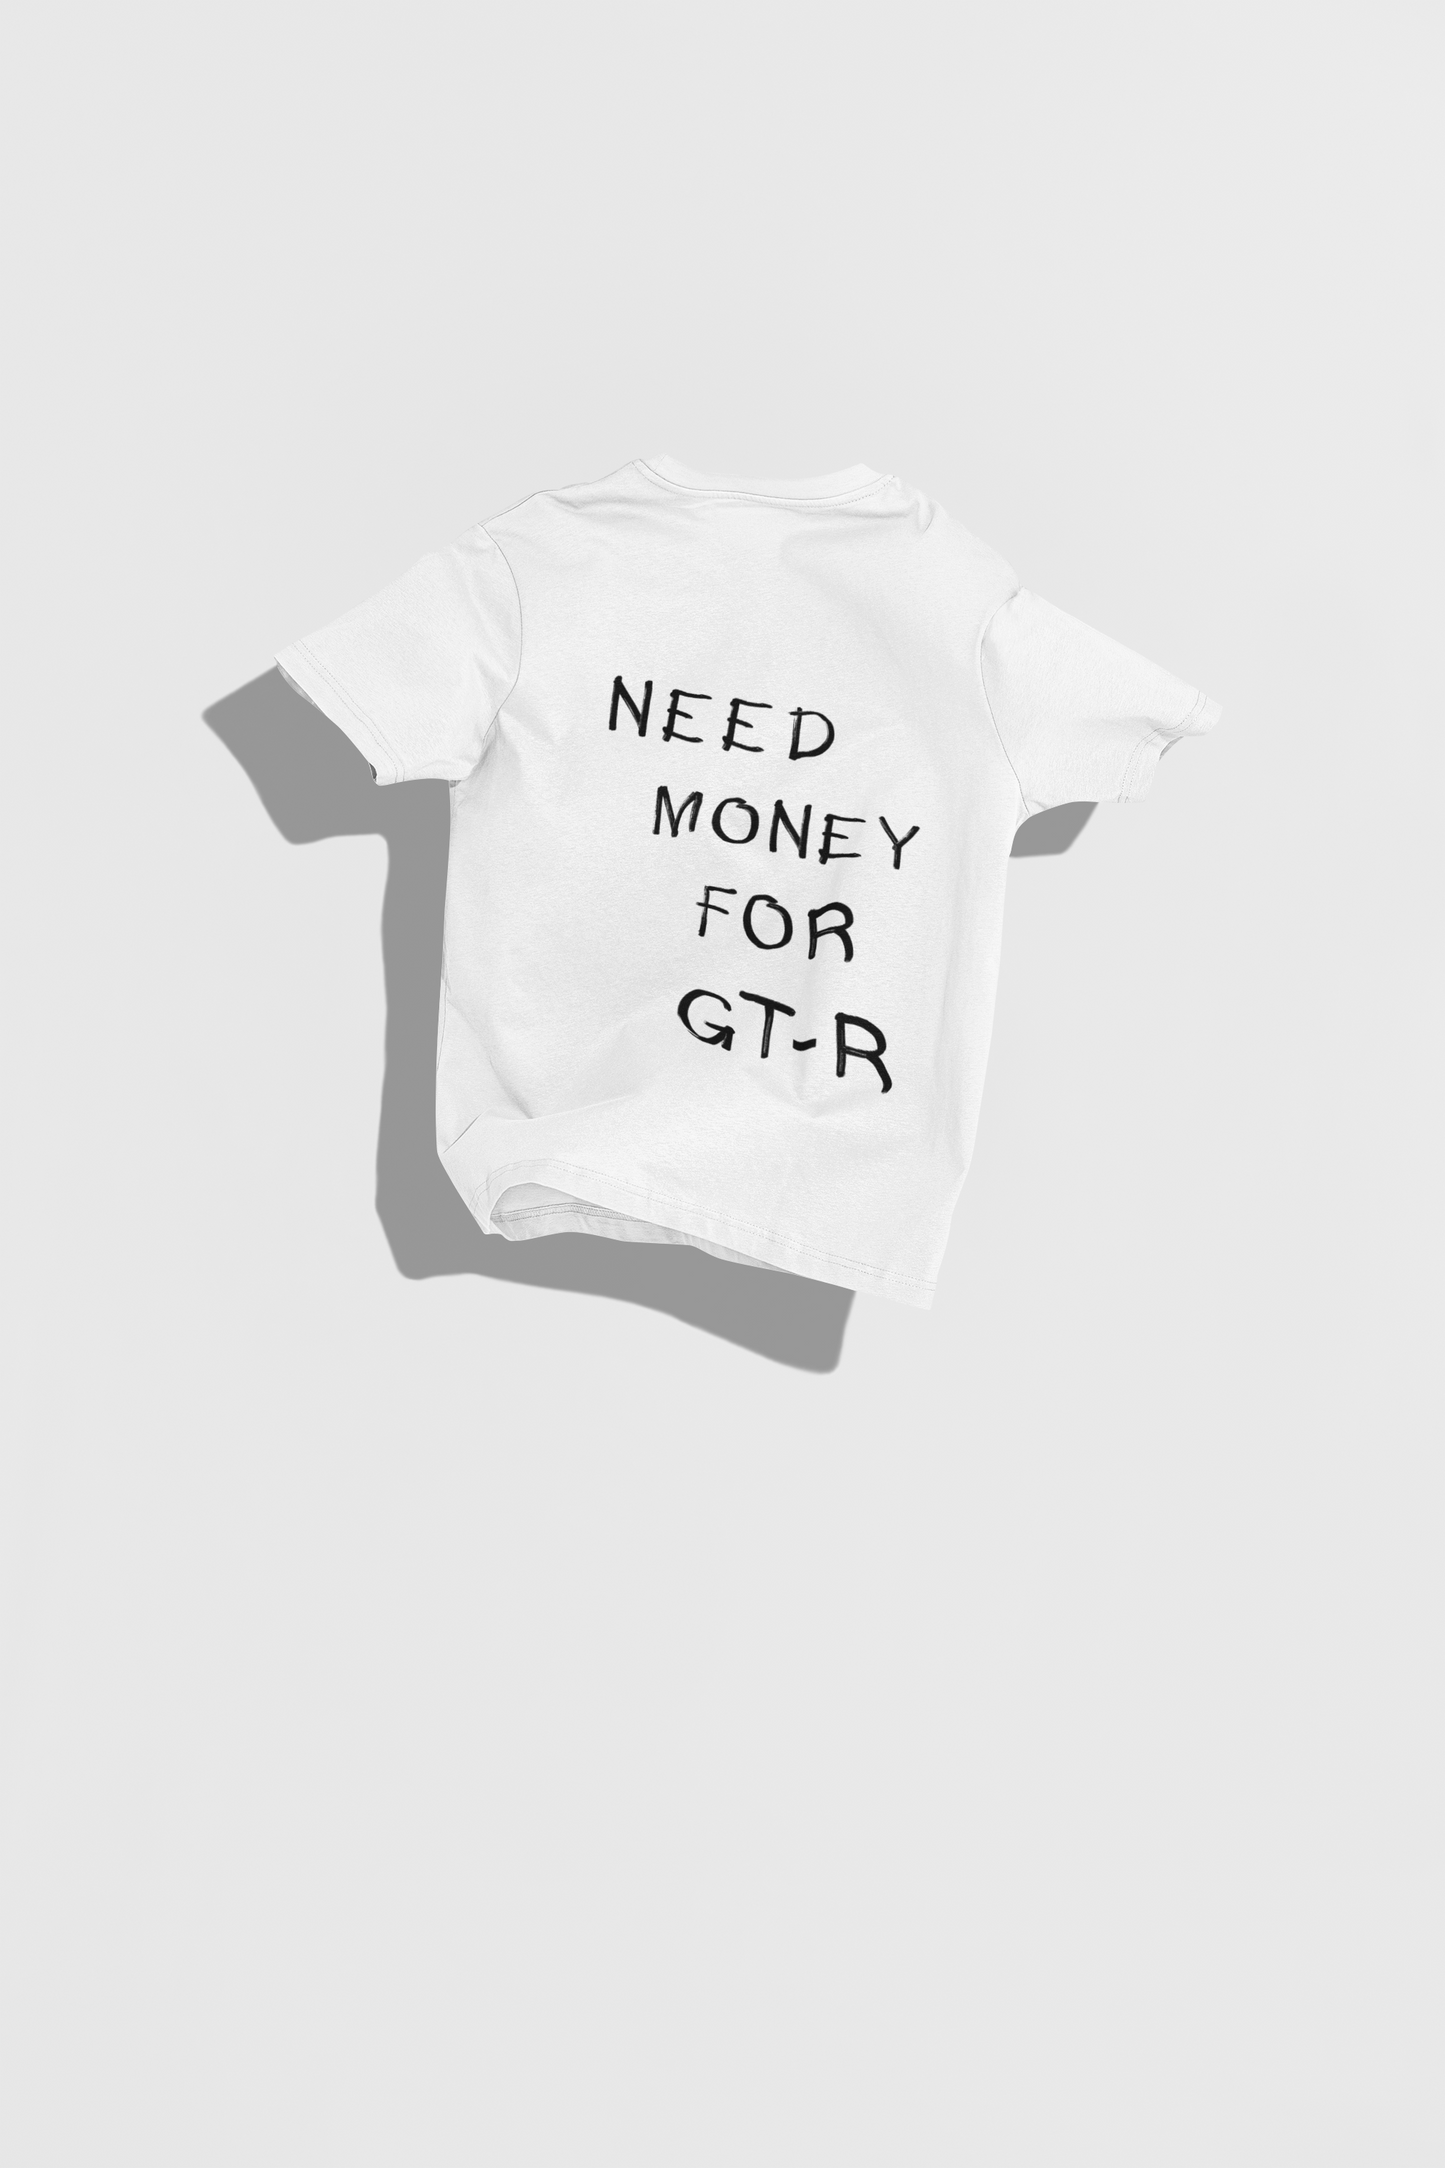 Need money for GT-R (White)